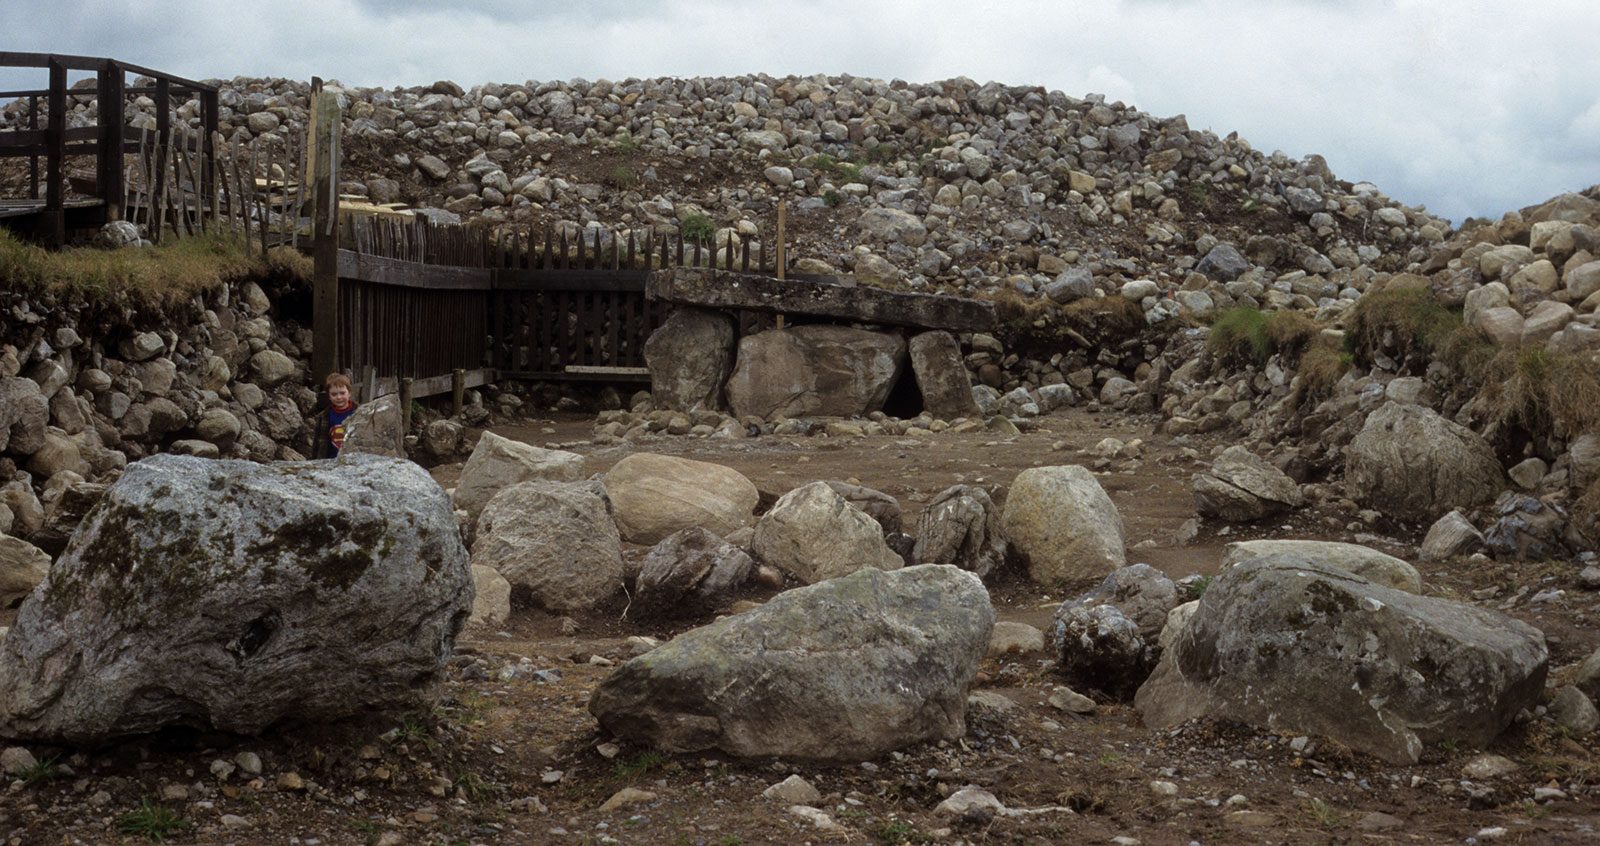 The circle and chamber at Listoghil during excavations in 1998.